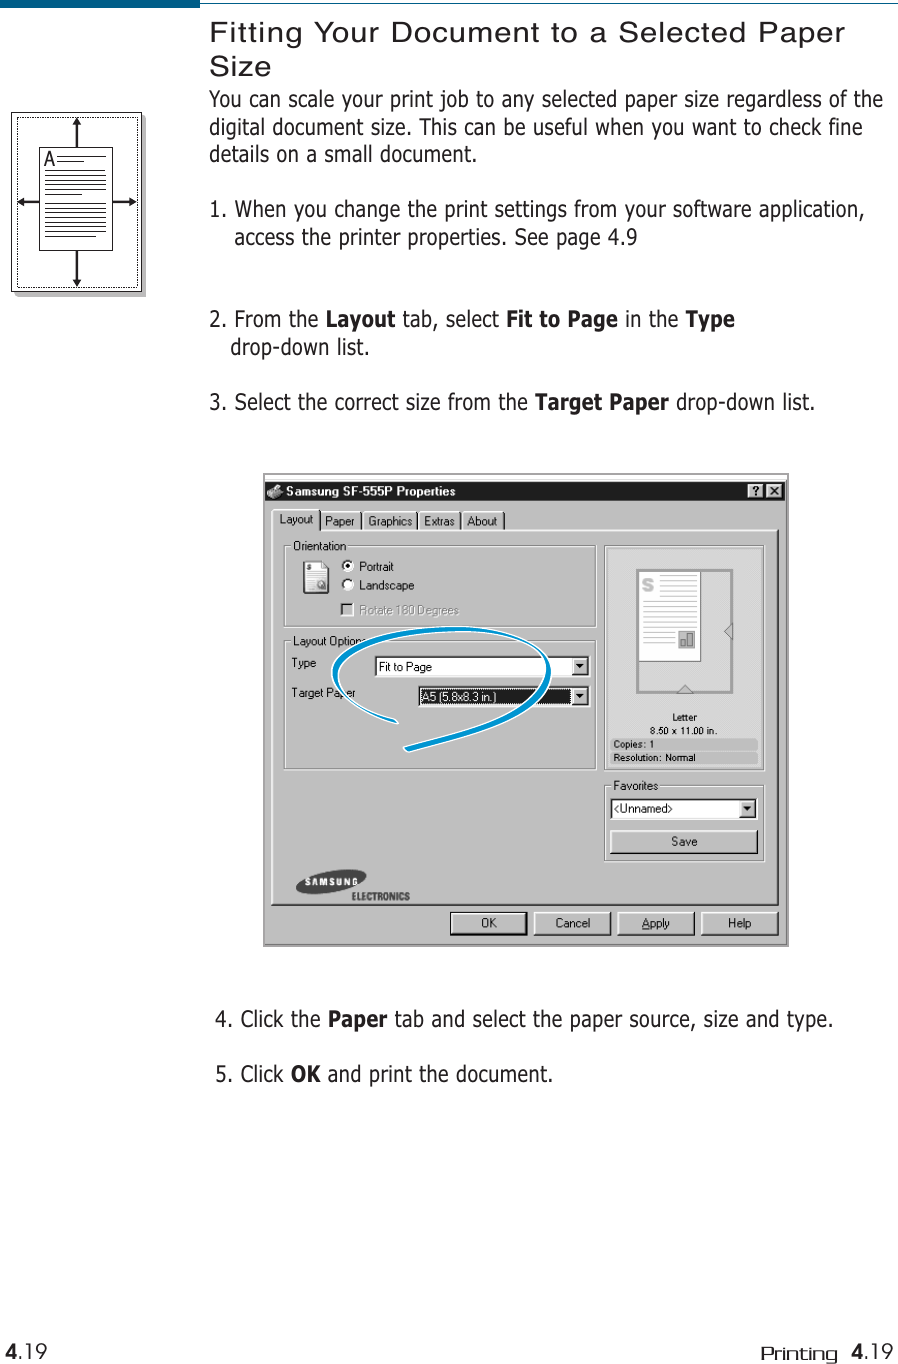 4.19Printing4.194. Click the Paper tab and select the paper source, size and type.5. Click OK and print the document. Fitting Your Document to a Selected PaperSizeYou can scale your print job to any selected paper size regardless of thedigital document size. This can be useful when you want to check finedetails on a small document. 1. When you change the print settings from your software application,access the printer properties. See page 4.92. From the Layout tab, select Fit to Page in the Typedrop-down list. 3. Select the correct size from the Target Paper drop-down list.A